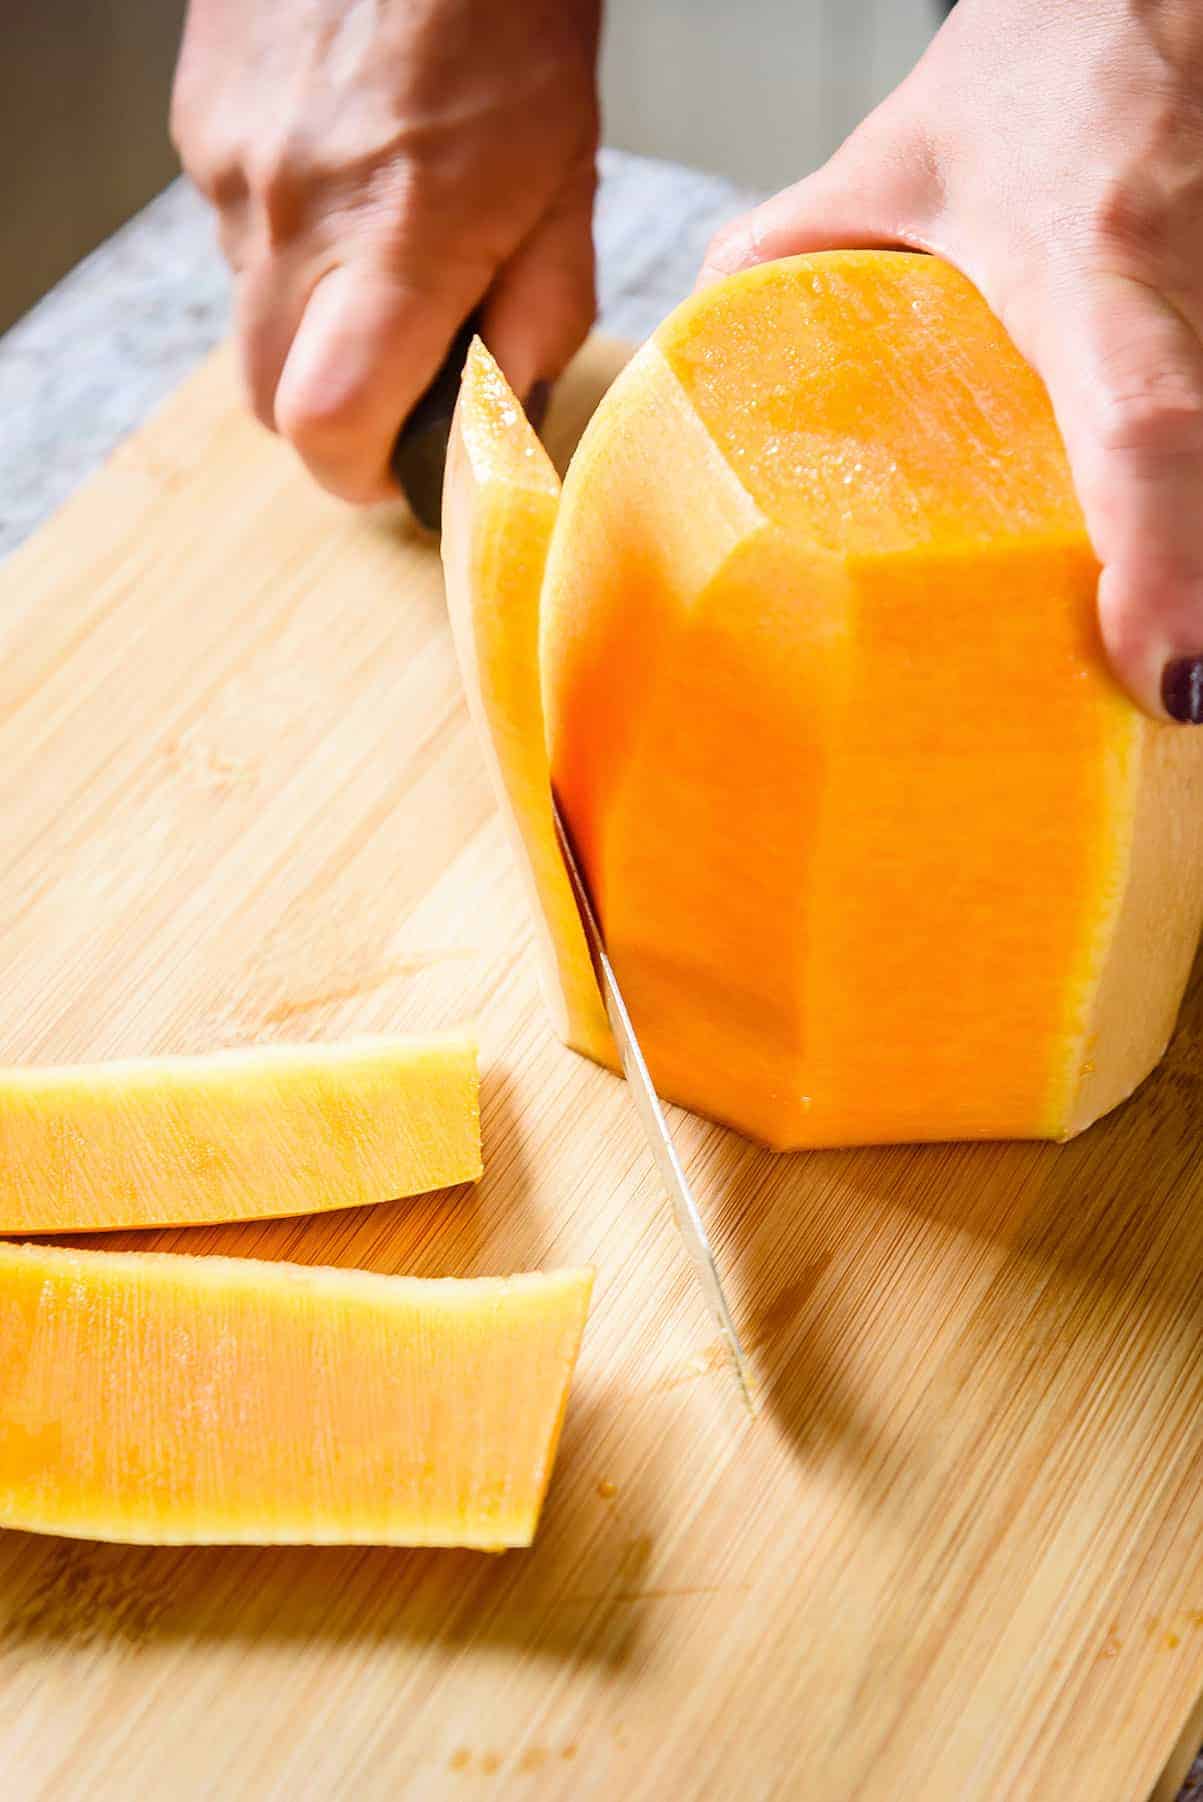 Cutting the peel off the sides of the squash